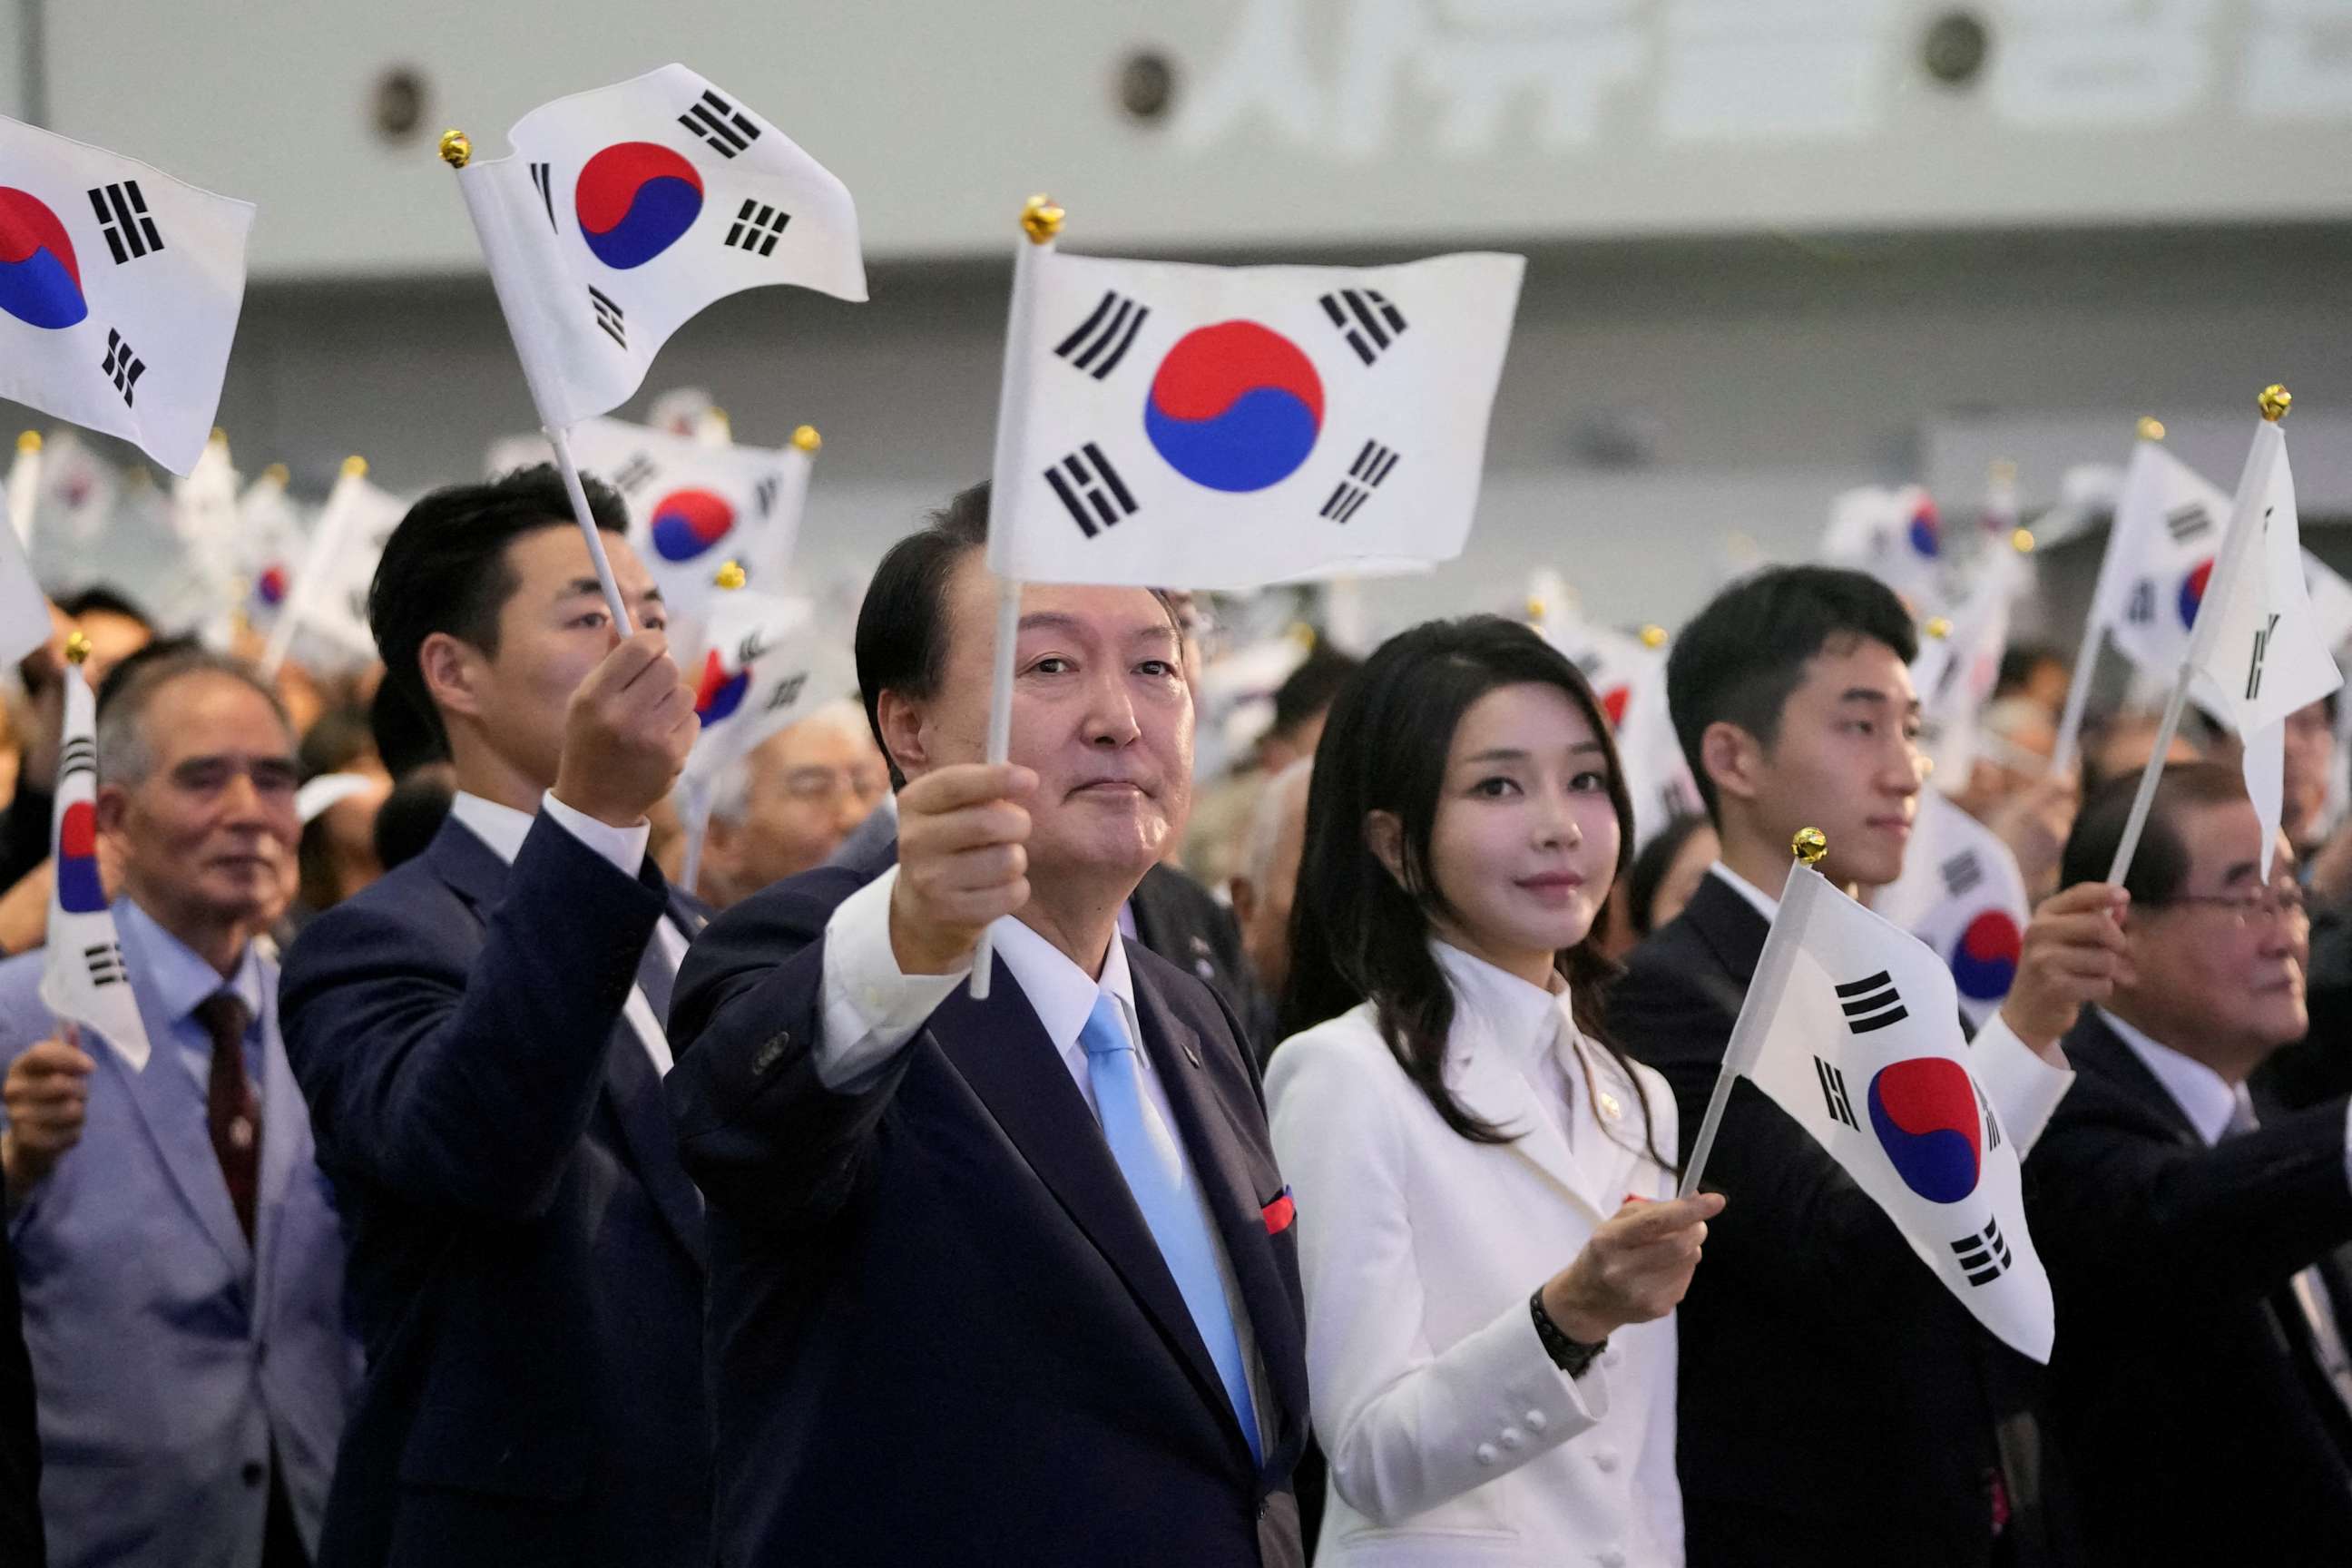 FILE PHOTO: South Korean President Yoon Suk Yeol and his wife Kim Keon Hee wave the national flag during a ceremony to celebrate the 78th anniversary of the Korean Liberation Day from Japanese colonial rule in 1945, in Seoul, South Korea, Aug. 15, 2023.